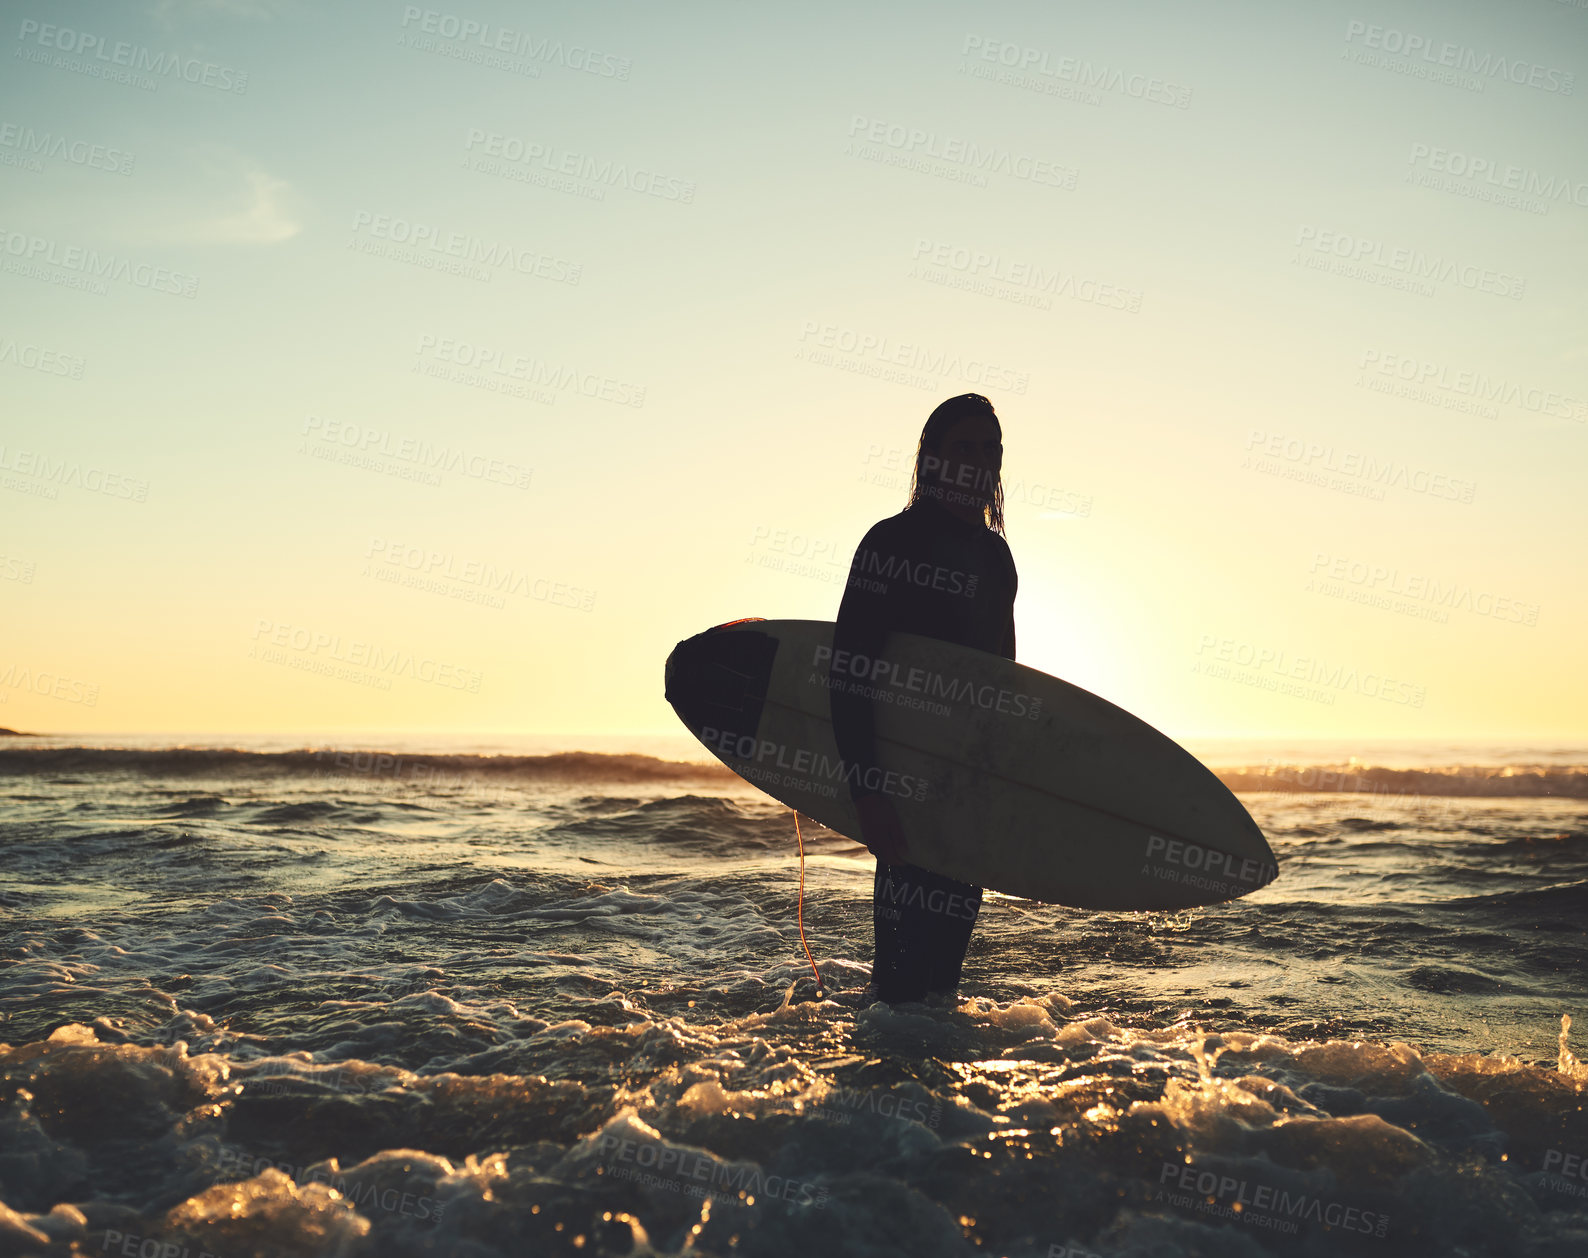 Buy stock photo Shot of a young man carrying a surfboard at the beach